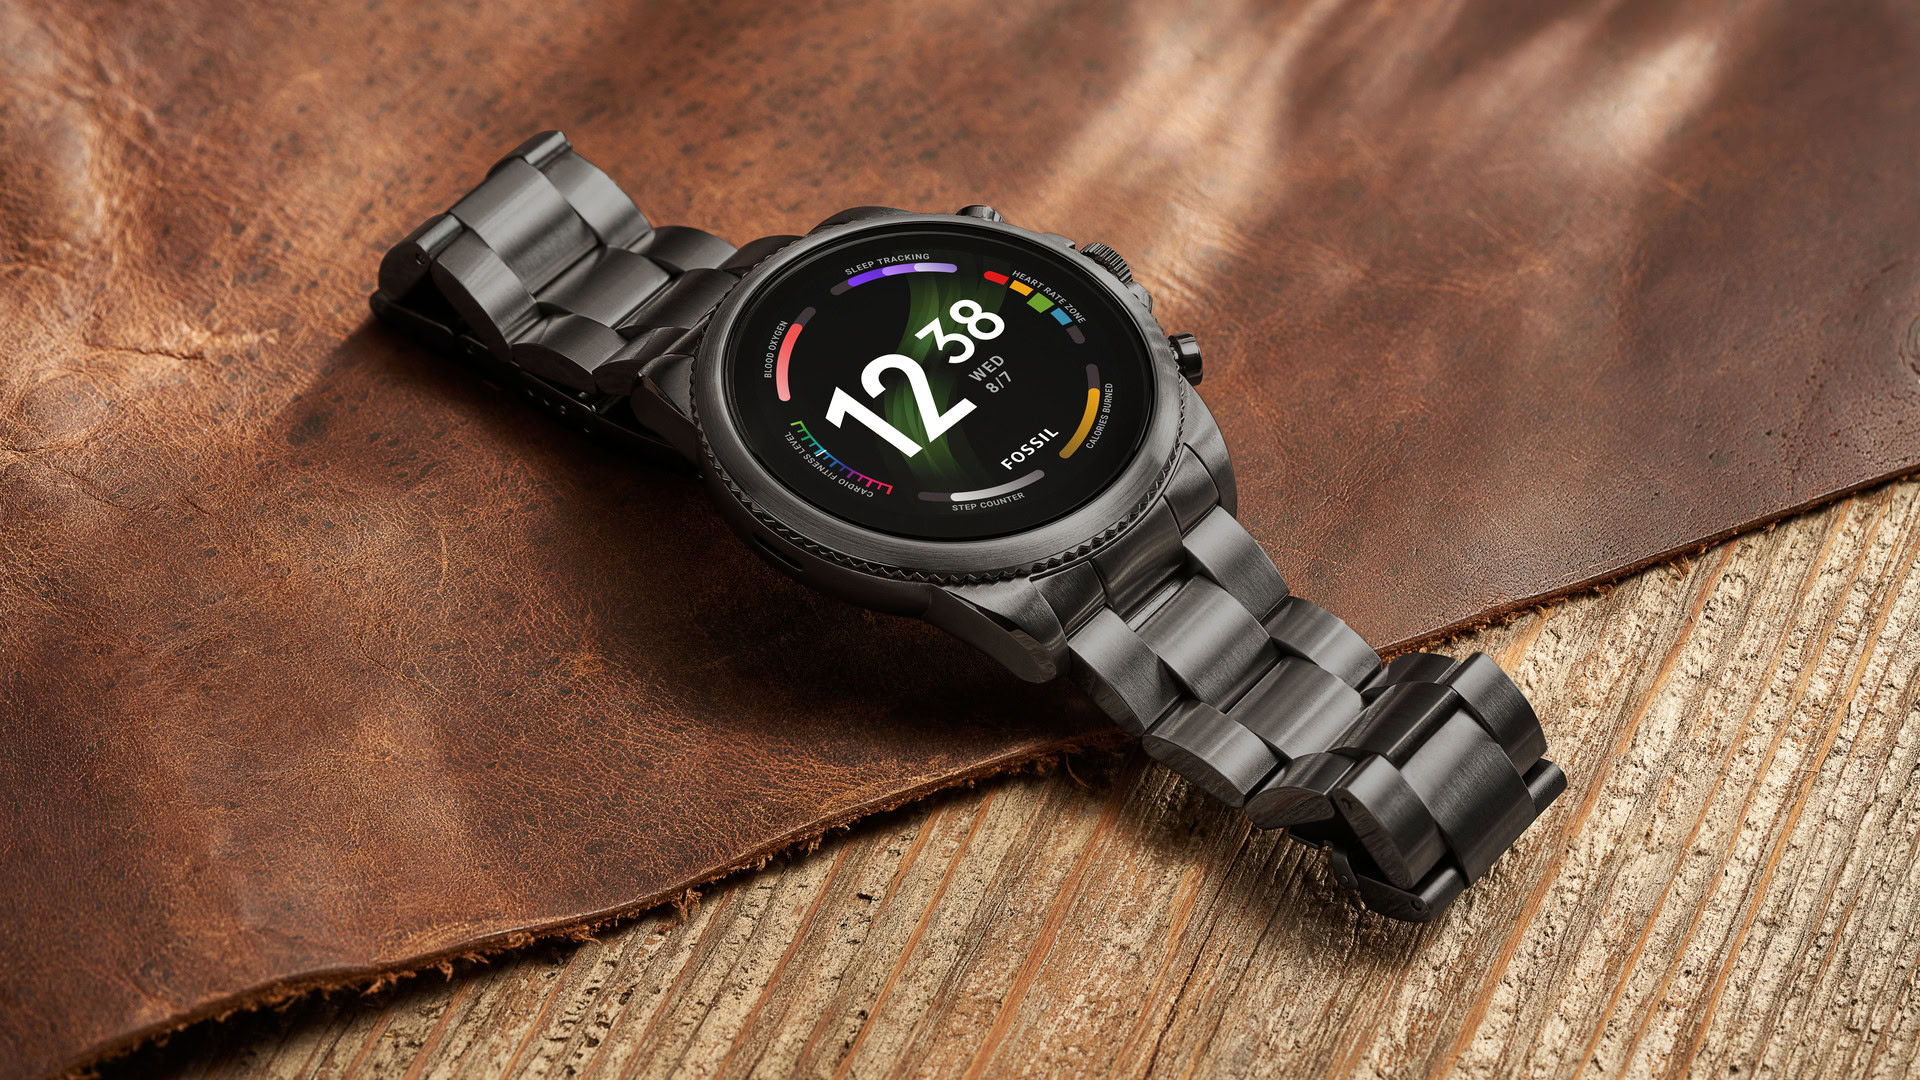 fashion smartwatches you can buy - Android Authority